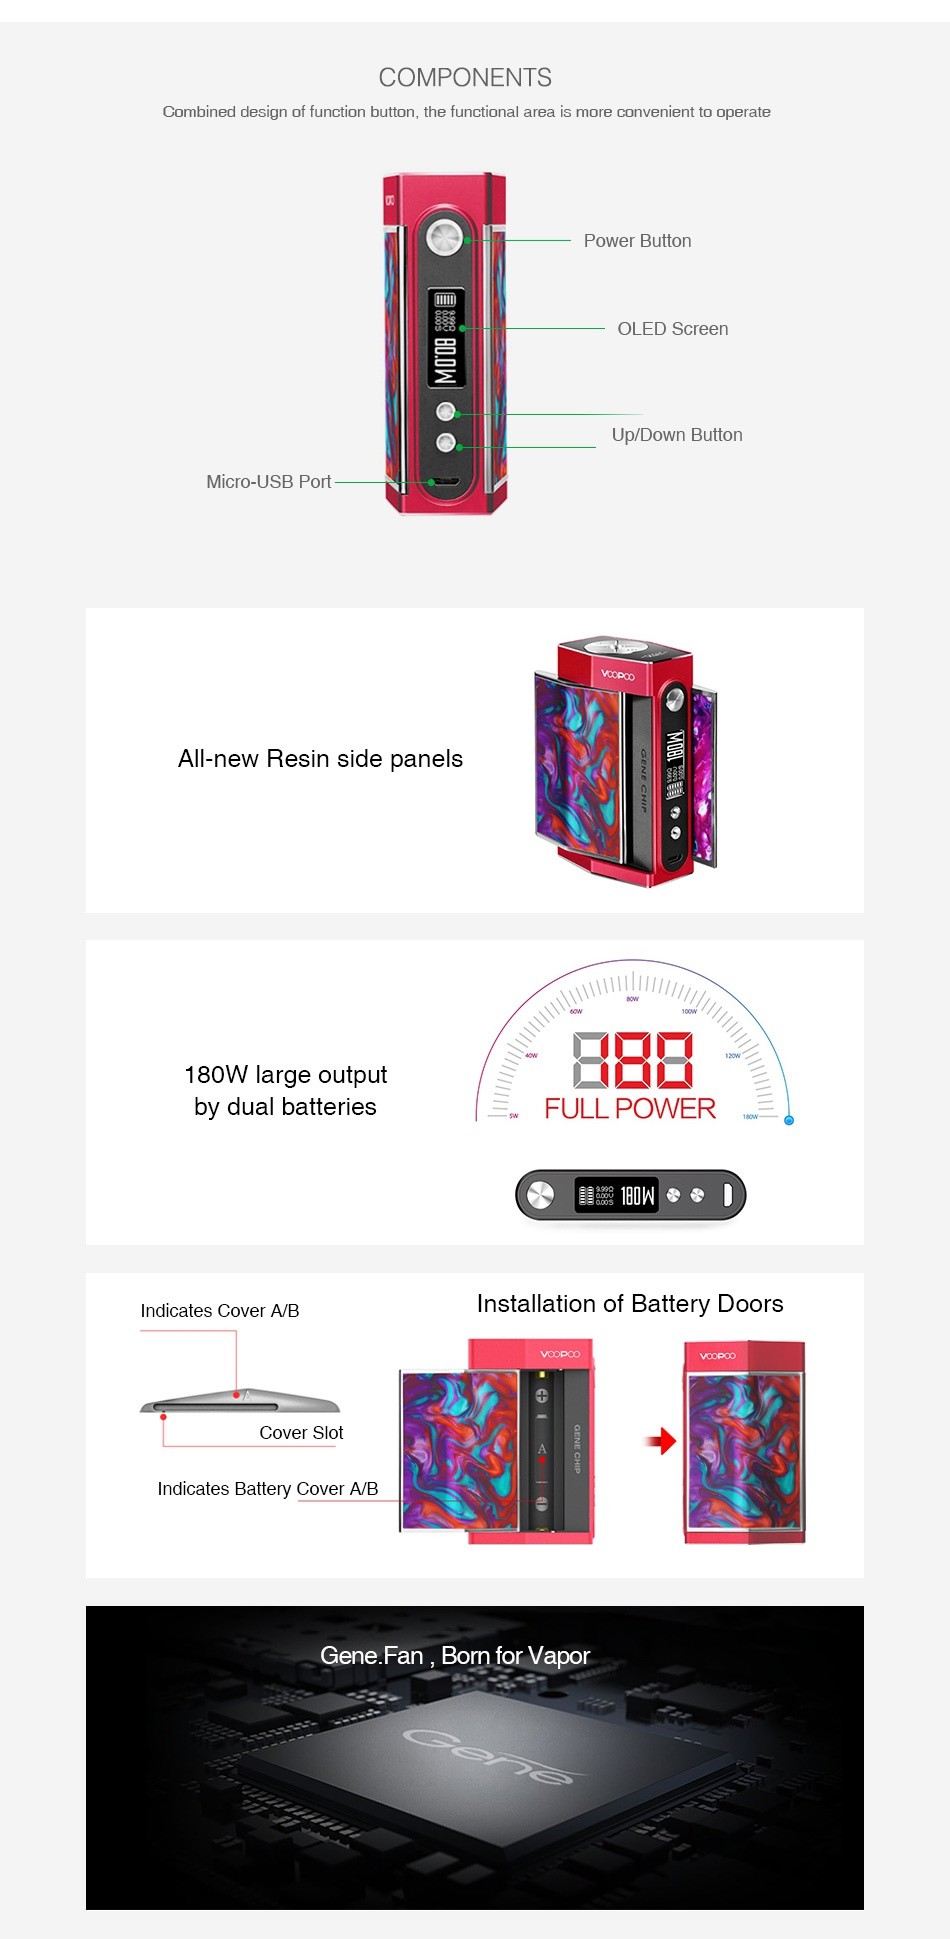 VOOPOO TOO Resin 180W TC Box MOD COMPONENTS Combined design of function button  the functional area is more convenient to operate Power Button OLED Screen Up Down Button Micro USB Port All new Resin side panels 180W large output by dual batteries FULL POWER ndicates cover a B Installation of Battery Doors VoOdoo Cover slot ndicates battery cover a B Gene  Fan  Born for vapor